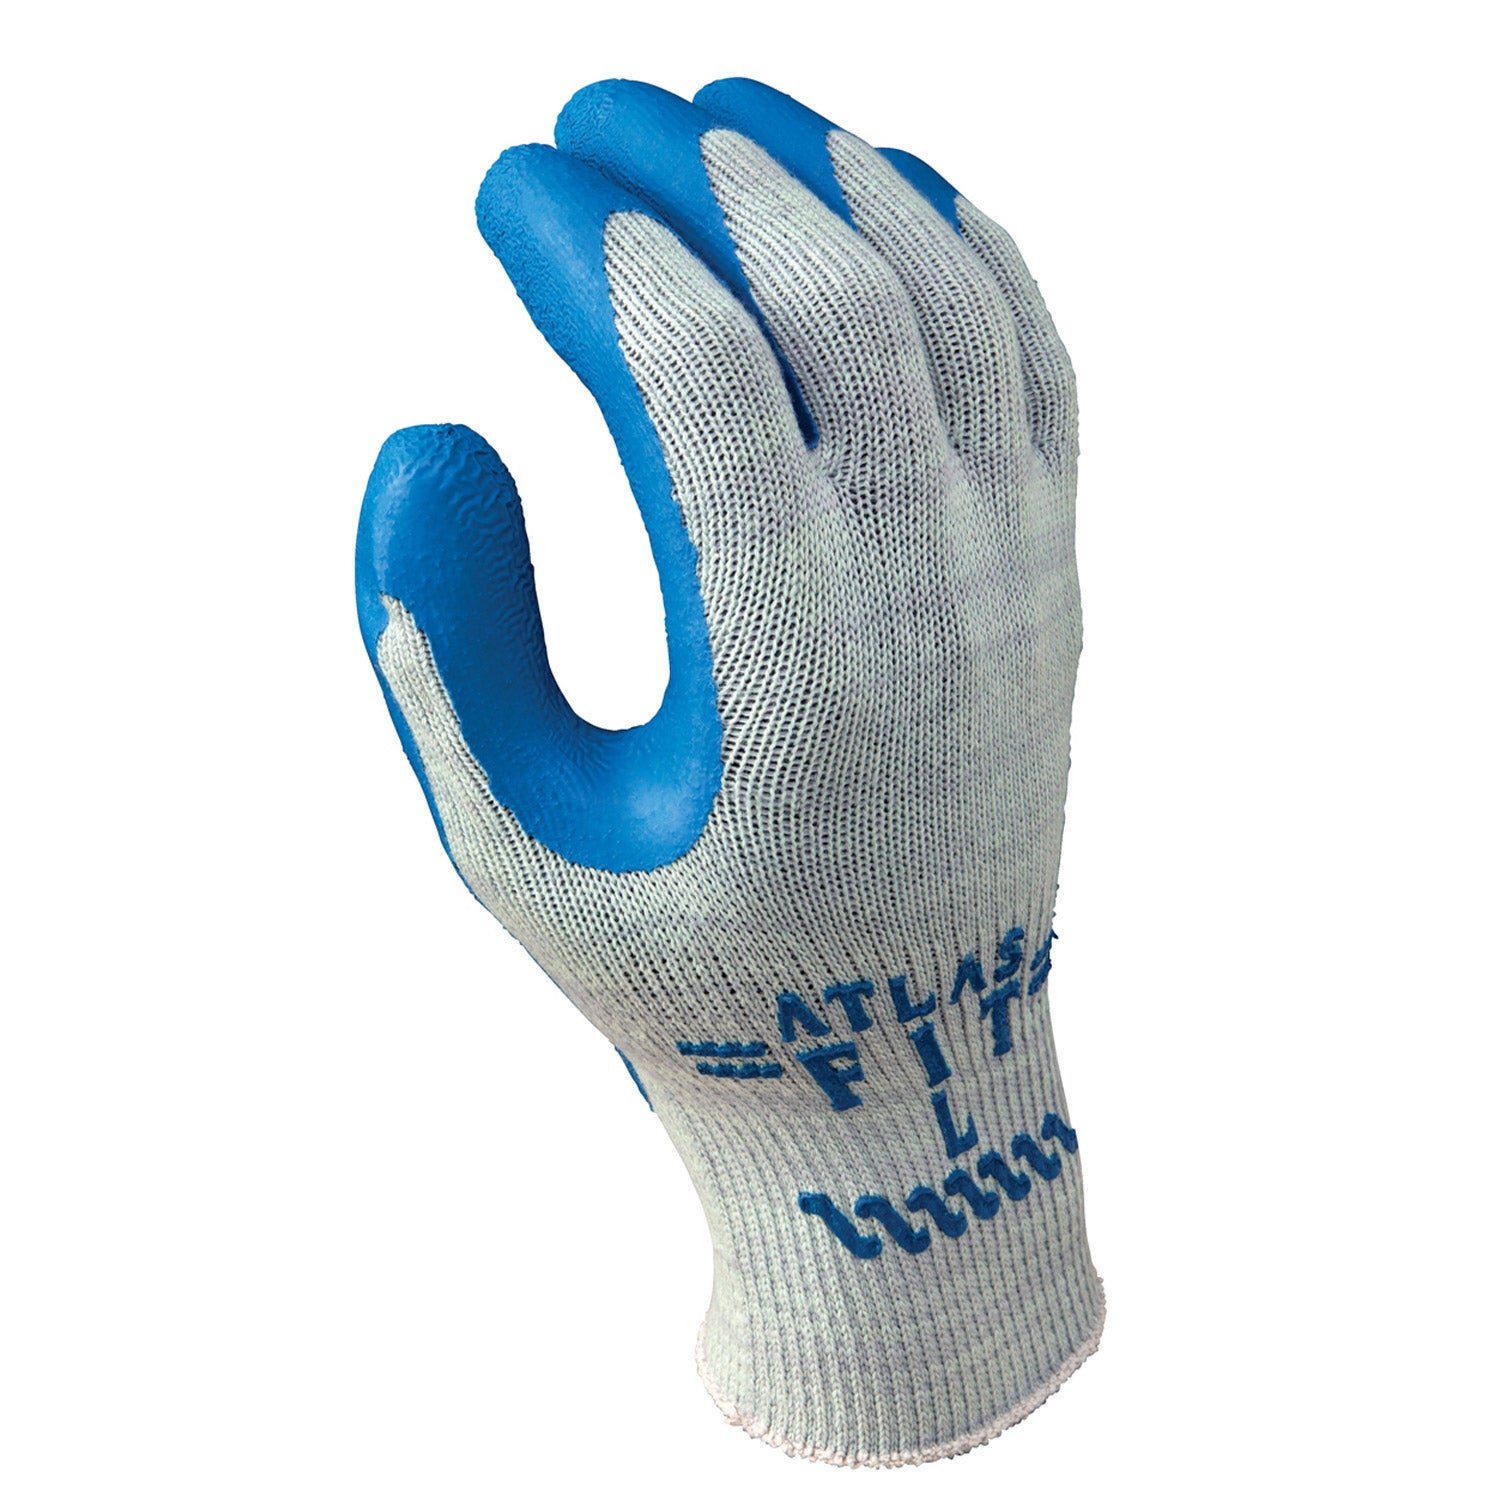 Atlas Fit Latex Coated Glove - Work World - Workwear, Work Boots, Safety Gear